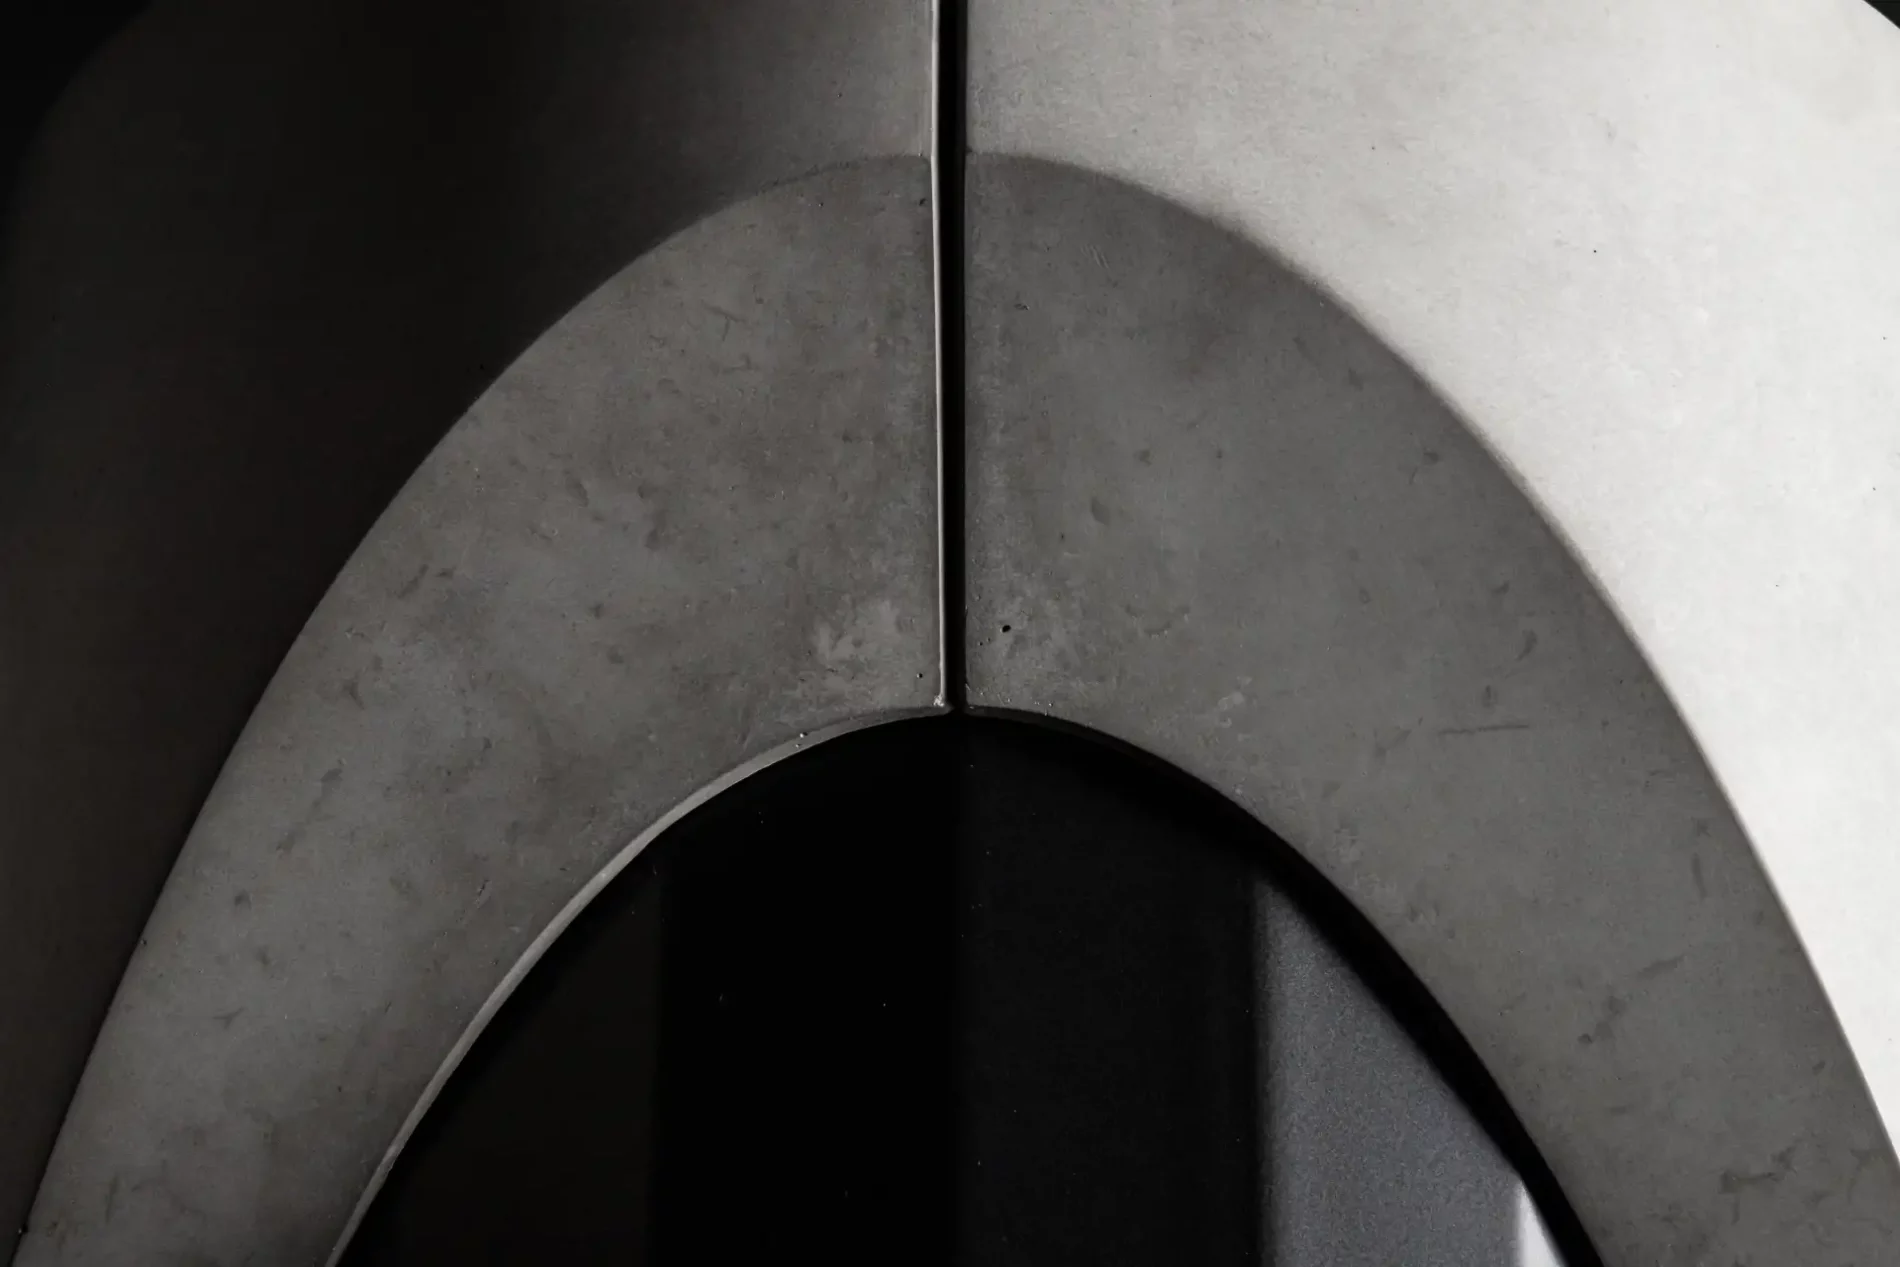 Brutalist detail of the concrete foot of the Sharp dining table by designer Bertrand Jayr